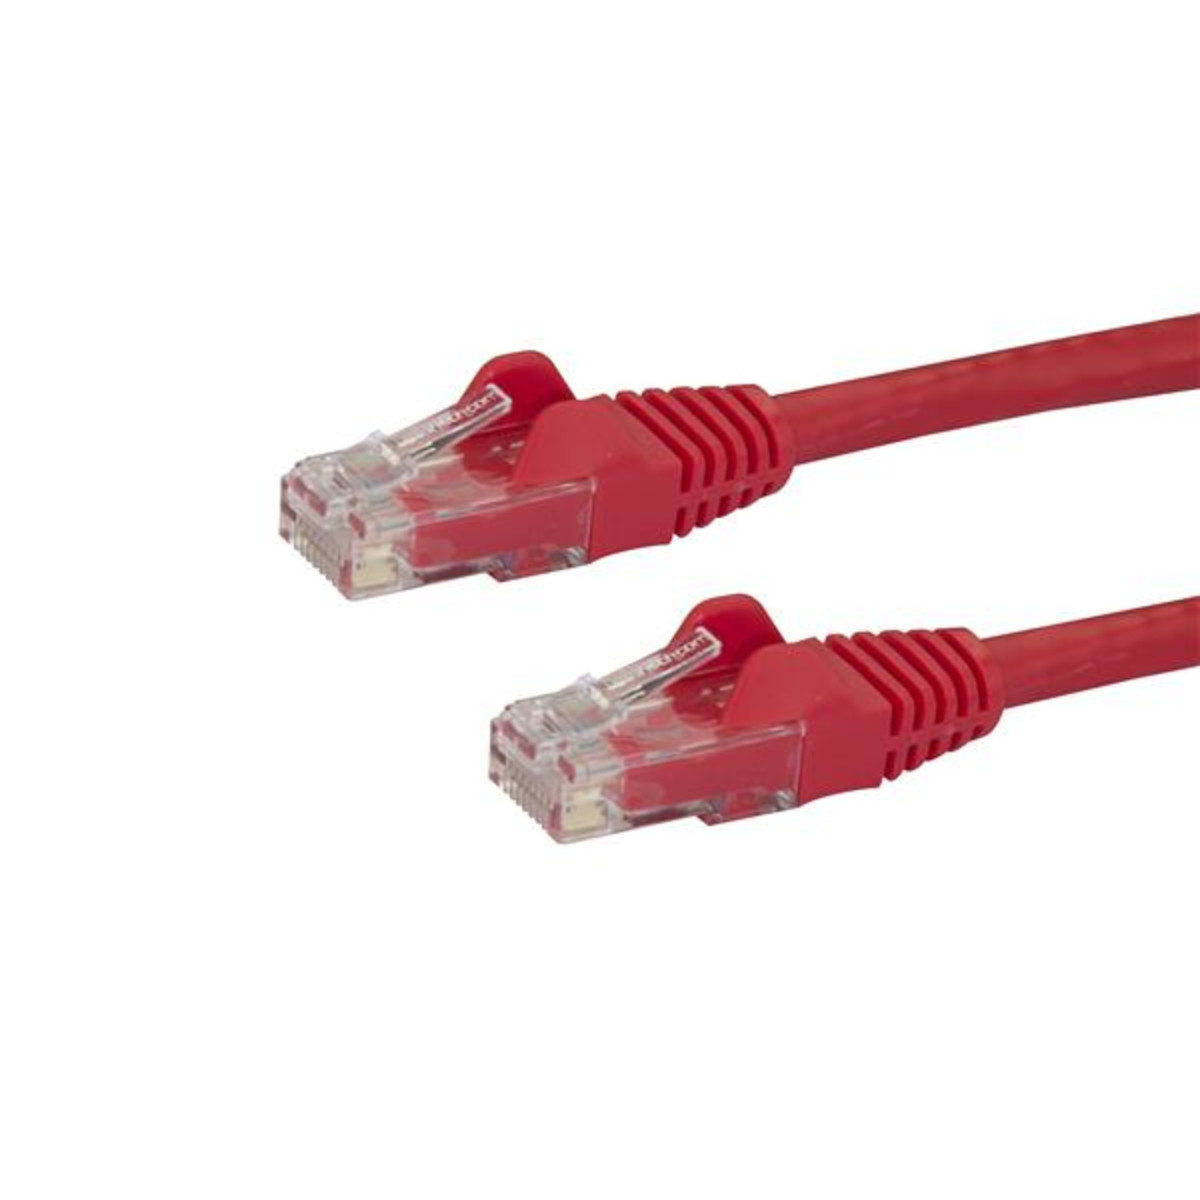 10m Red Snagless UTP Cat6 Patch Cable